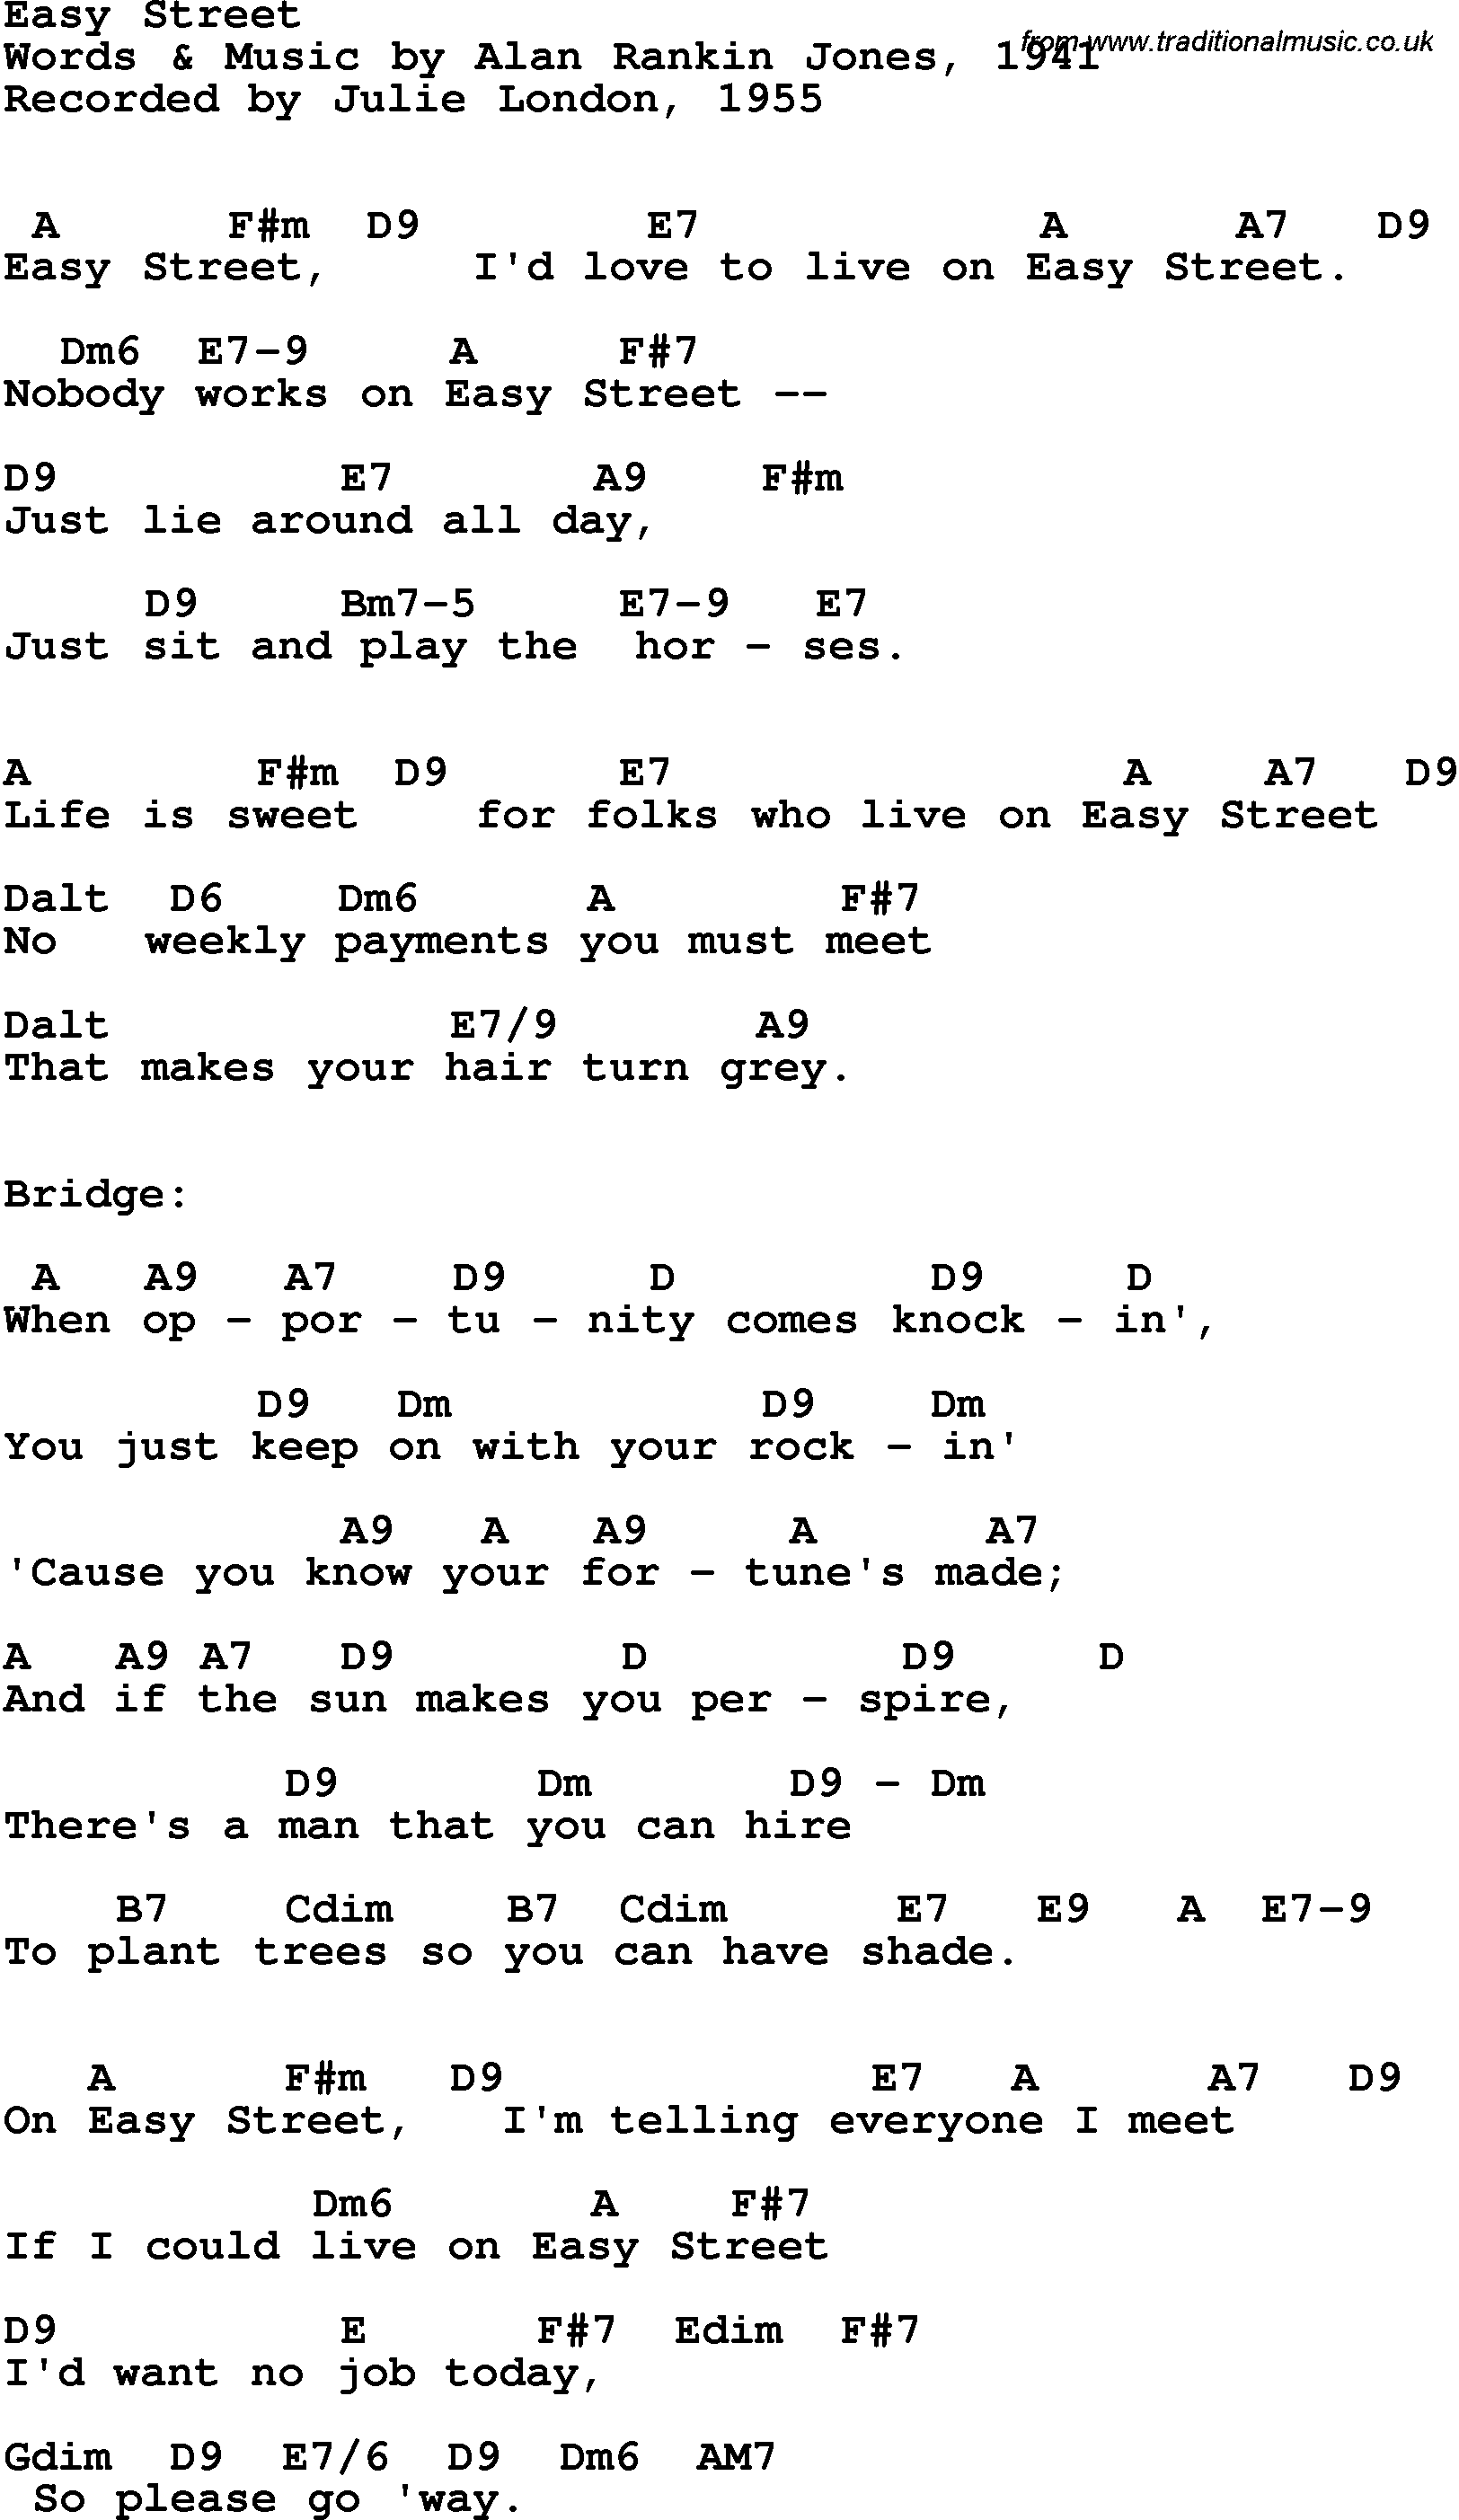 Song Lyrics with guitar chords for Easy Street - Julie London, 1955